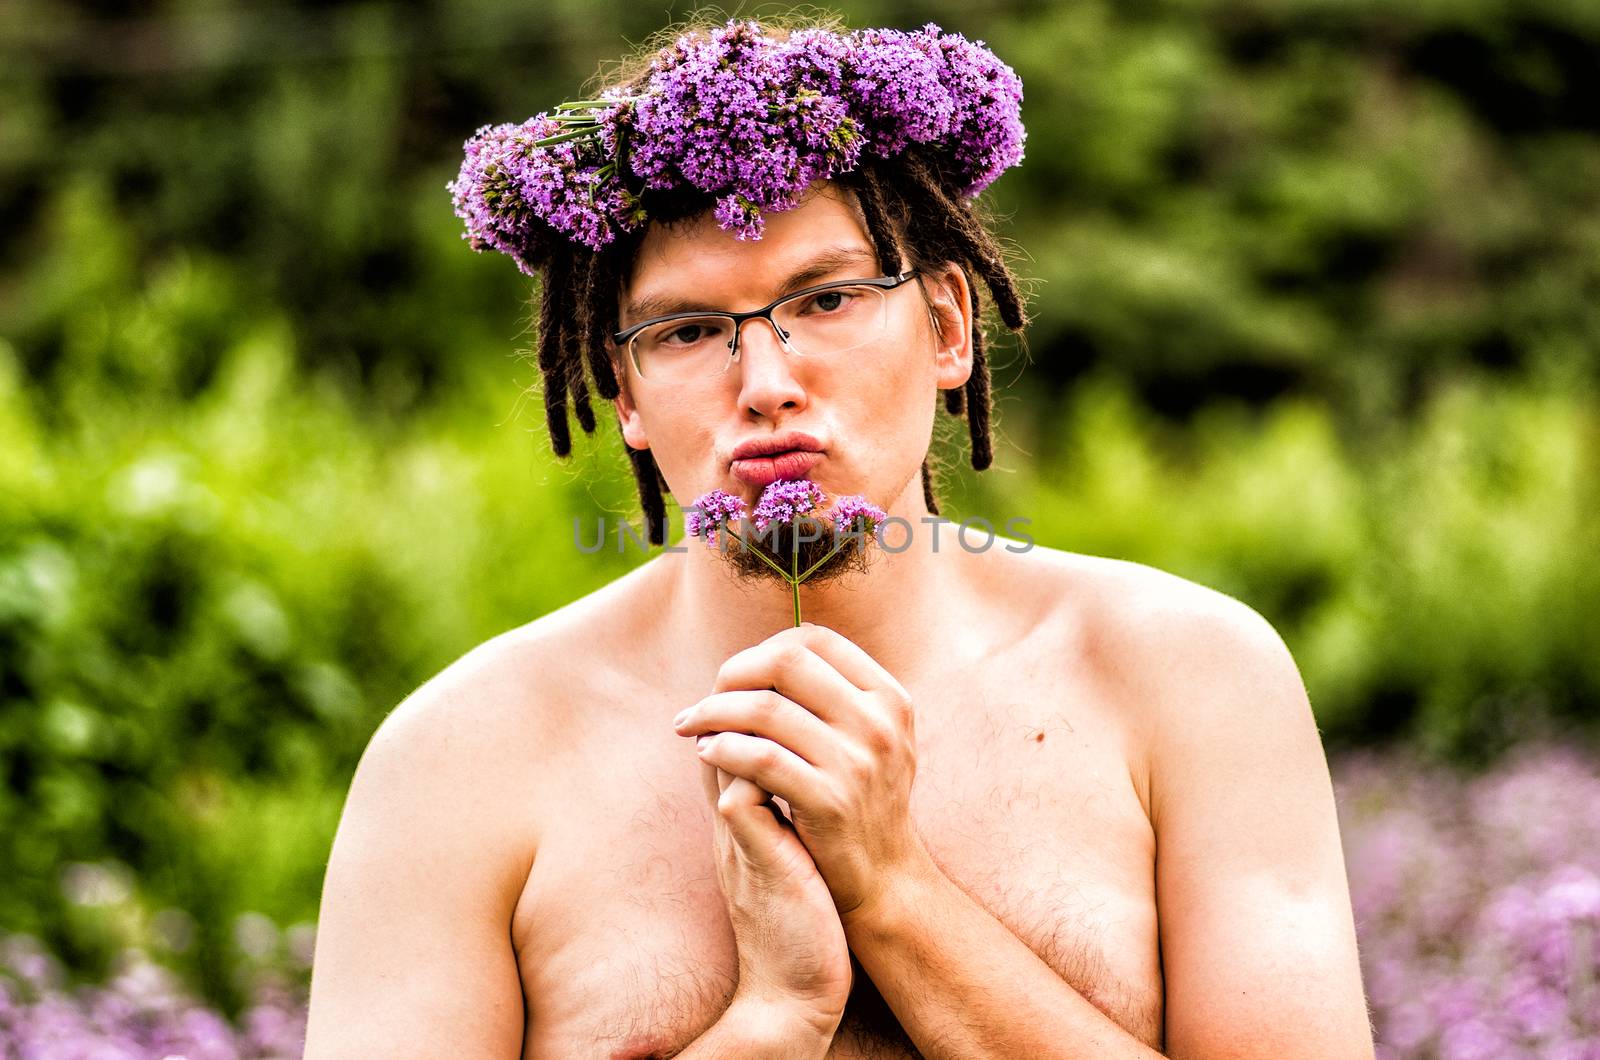 a funny man with dreadlocks and flower wreath holds a flower